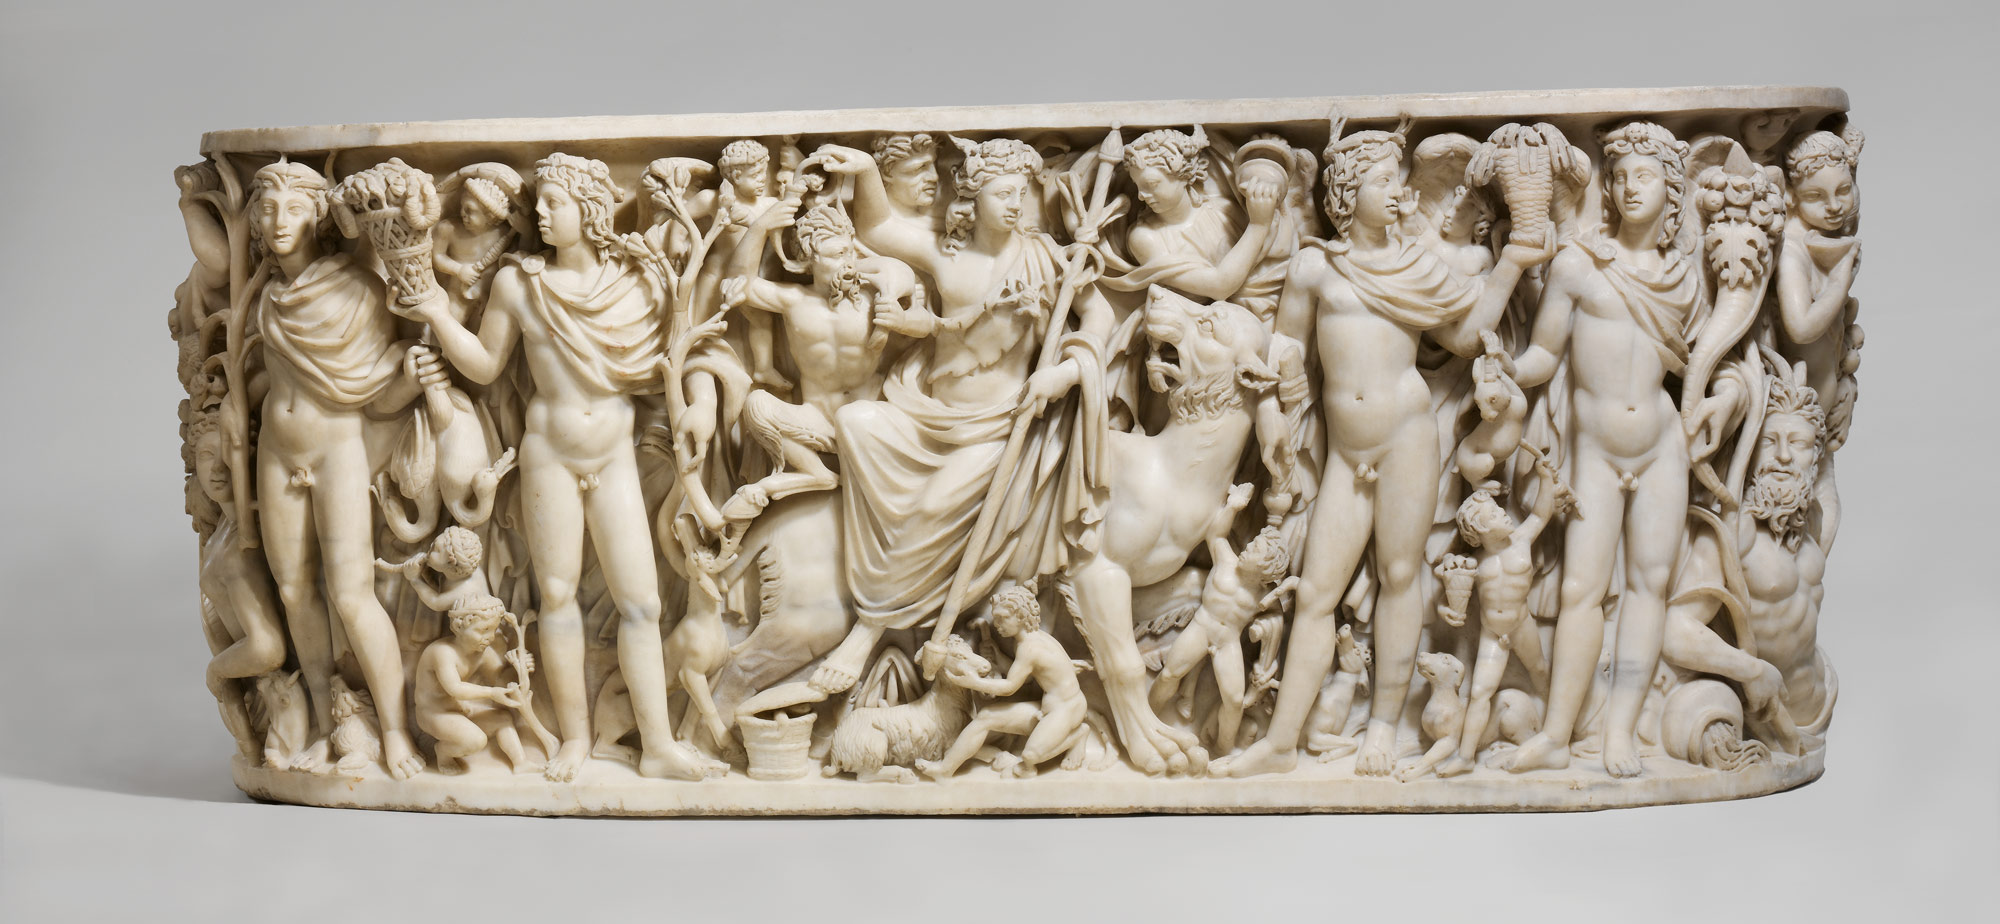 Marble sarcophagus with the Triumph of Dionysos and the Seasons